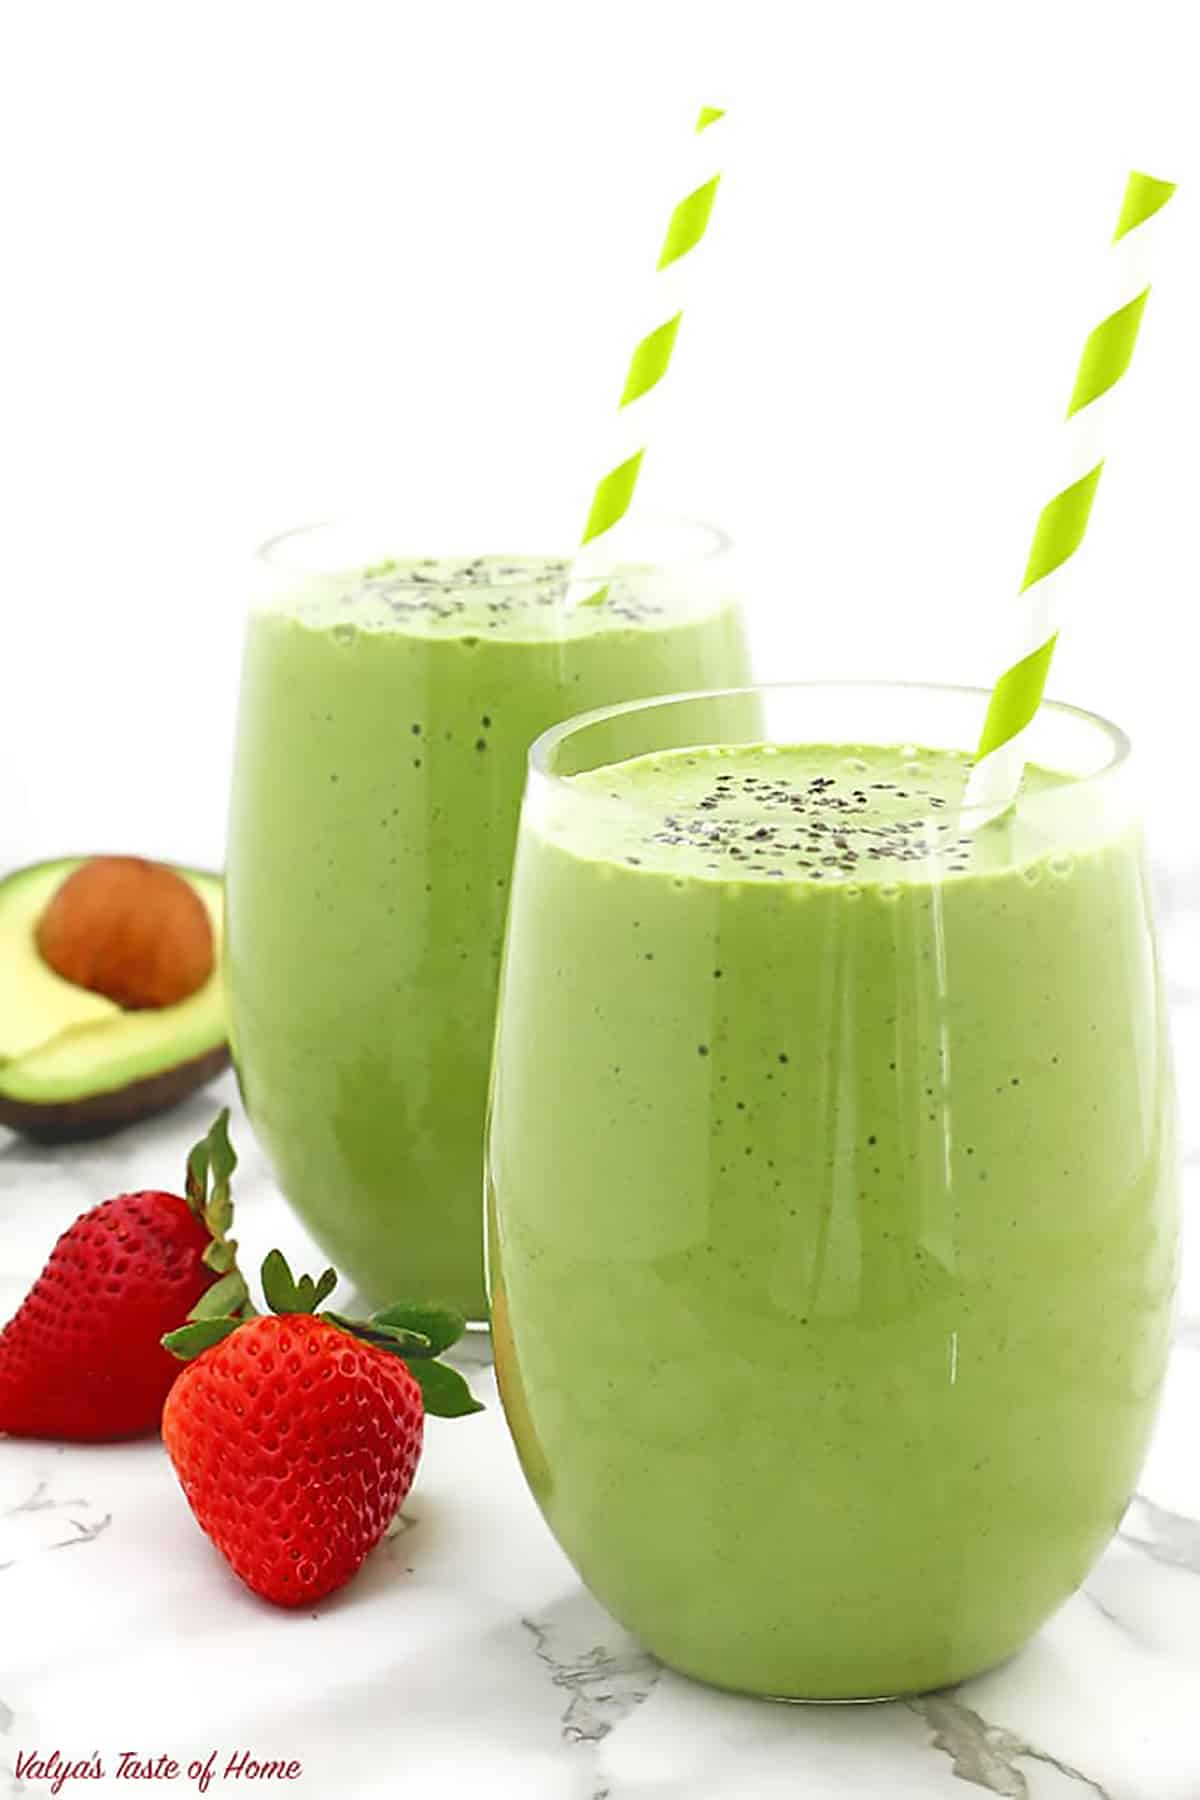 Smoothies are super quick and easy to make, but packs quite an energy punch and keep you full and zooming for a while. ;)